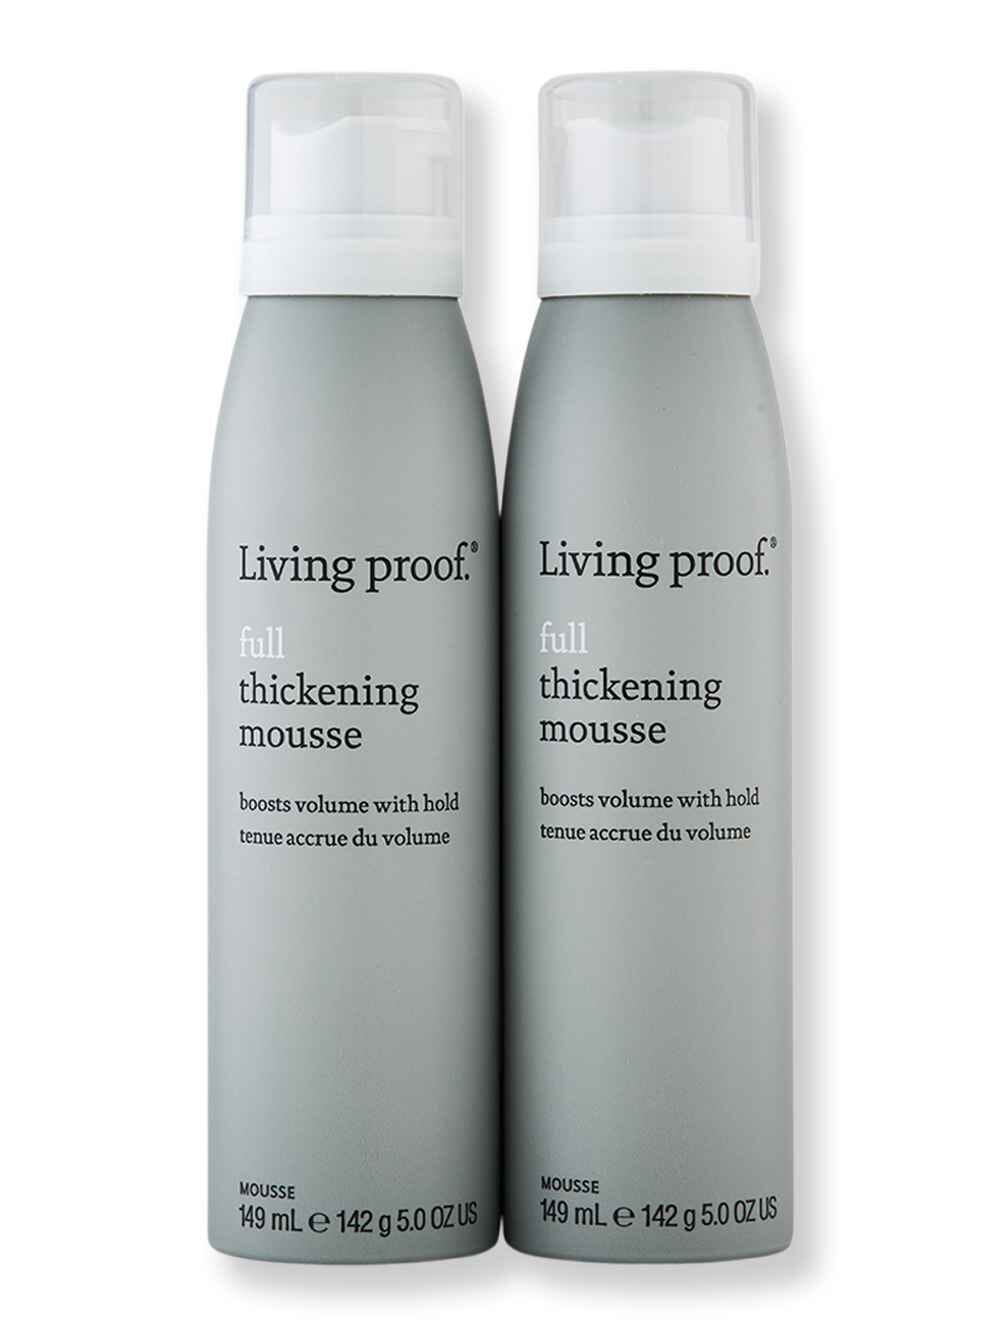 Living Proof Living Proof Full Thickening Mousse 2 Ct Mousses & Foams 